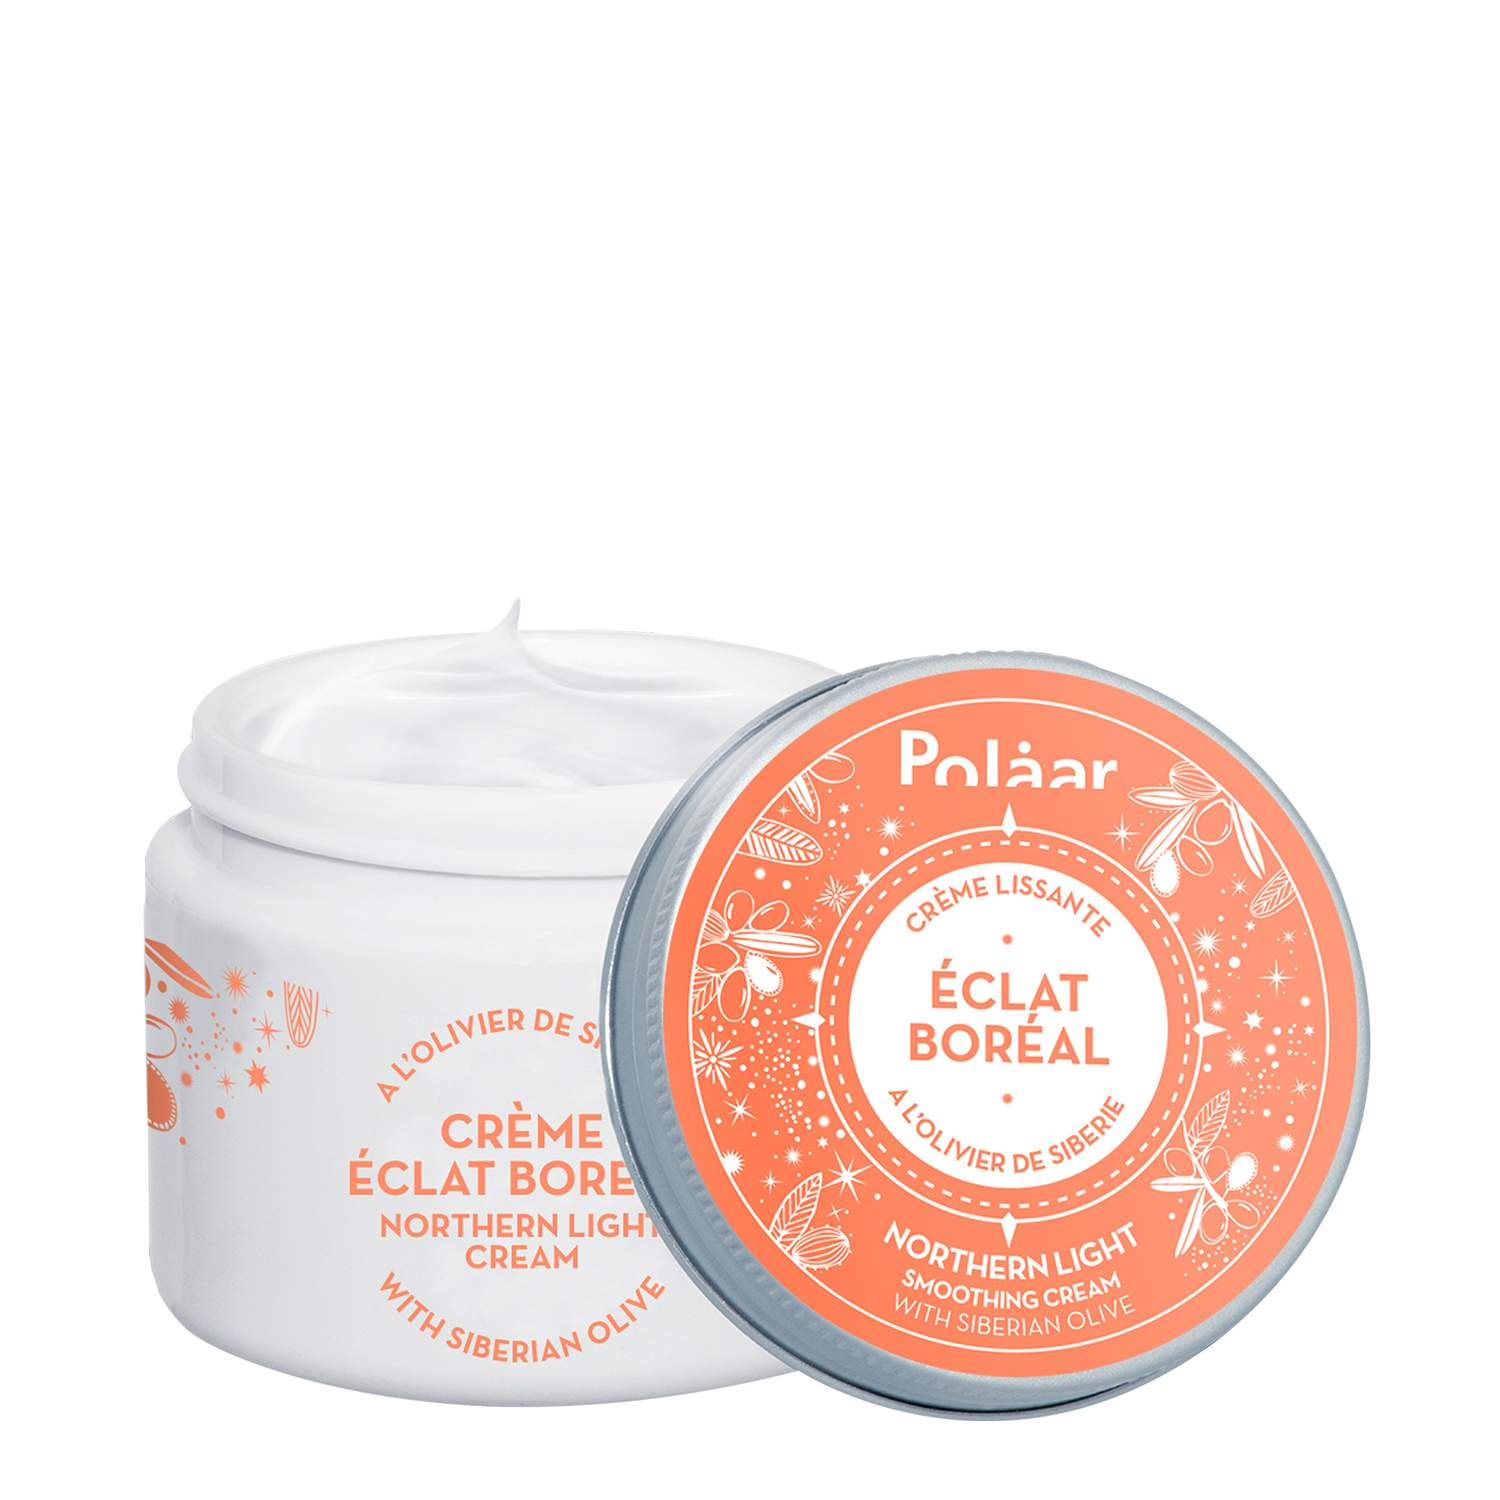 Polaar Northern Light Smoothing Cream with Siberian Olive Tree Polaar Northern Light Smoothing Cream with Siberian Olive Tree 1